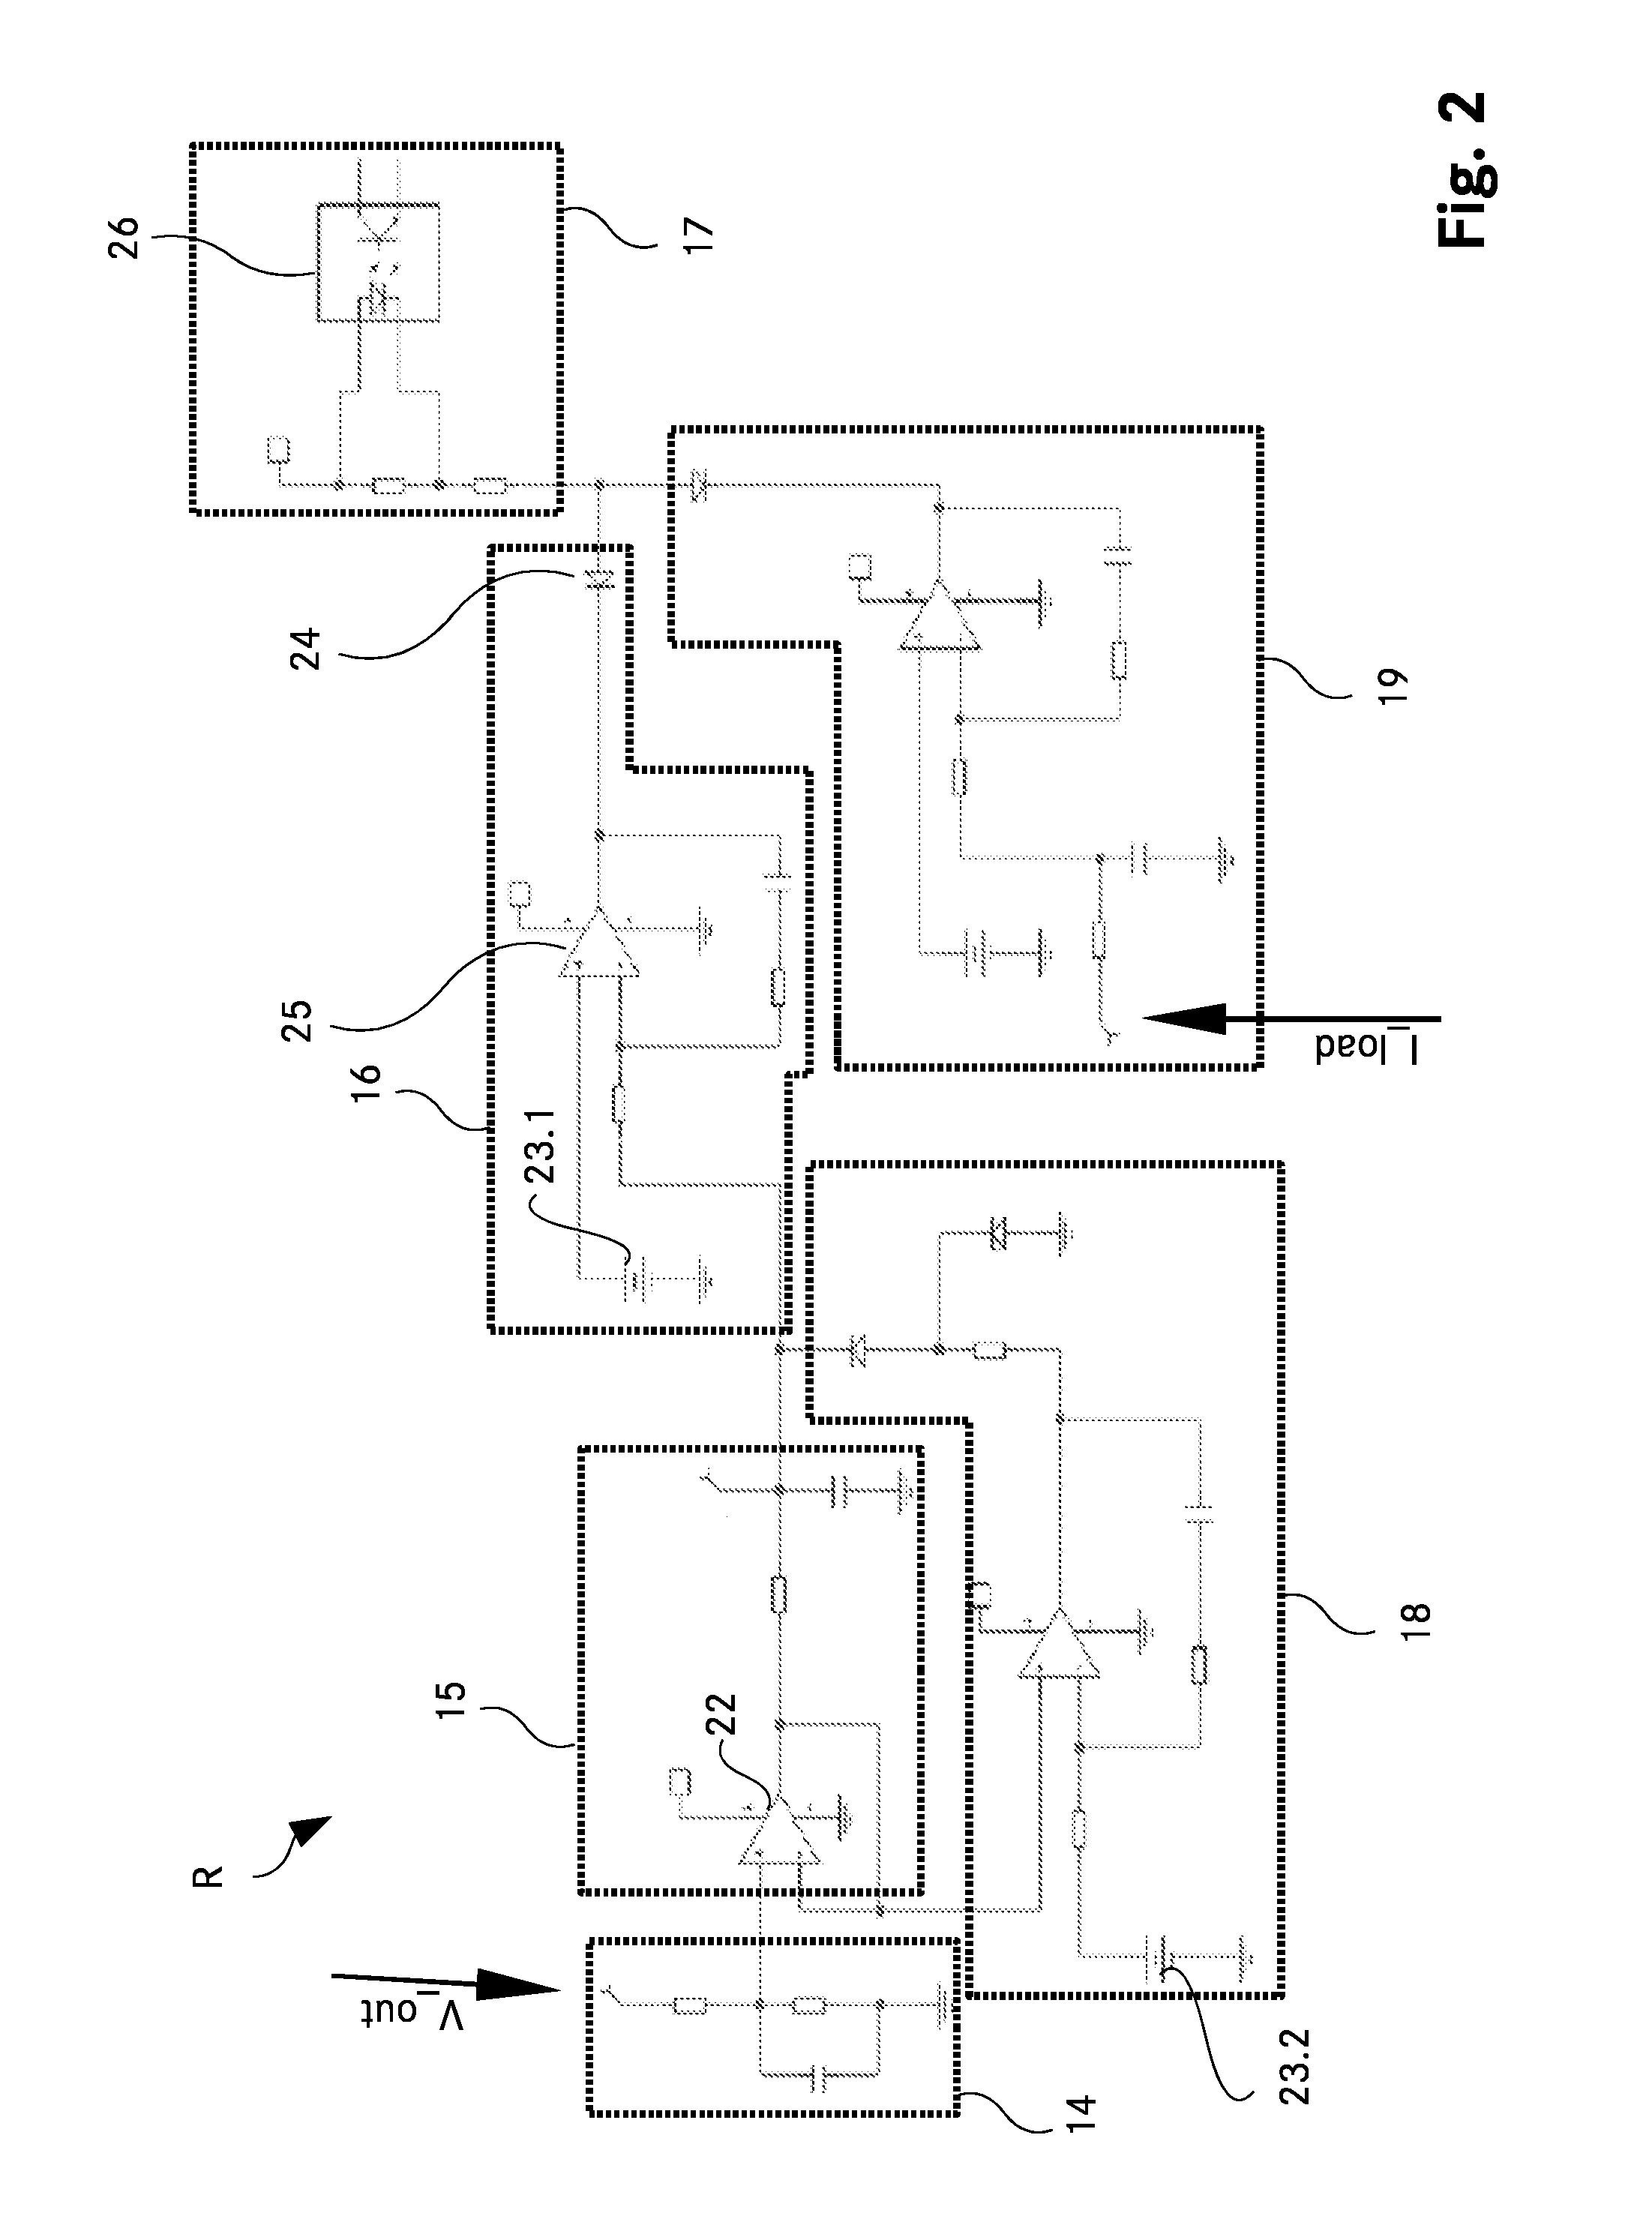 Synchronized isolated ac-ac converter with variable regulated output voltage